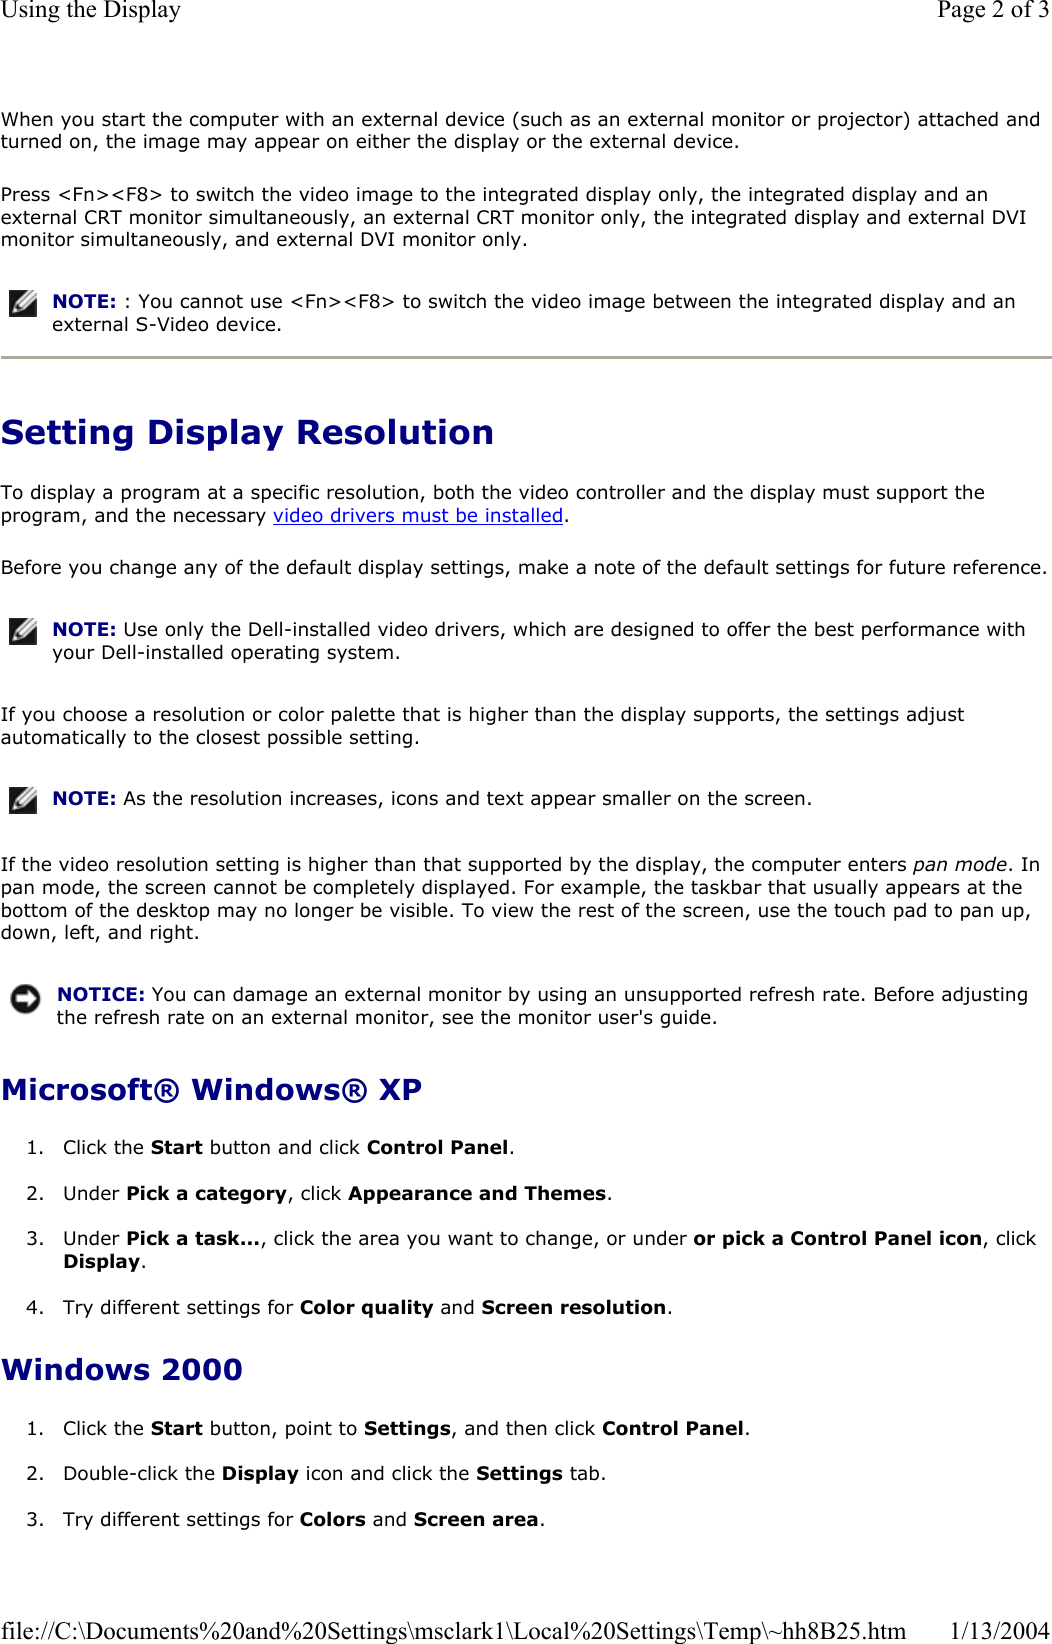 When you start the computer with an external device (such as an external monitor or projector) attached and turned on, the image may appear on either the display or the external device. Press &lt;Fn&gt;&lt;F8&gt; to switch the video image to the integrated display only, the integrated display and an external CRT monitor simultaneously, an external CRT monitor only, the integrated display and external DVI monitor simultaneously, and external DVI monitor only. Setting Display Resolution To display a program at a specific resolution, both the video controller and the display must support the program, and the necessary video drivers must be installed.Before you change any of the default display settings, make a note of the default settings for future reference.If you choose a resolution or color palette that is higher than the display supports, the settings adjust automatically to the closest possible setting. If the video resolution setting is higher than that supported by the display, the computer enters pan mode. In pan mode, the screen cannot be completely displayed. For example, the taskbar that usually appears at the bottom of the desktop may no longer be visible. To view the rest of the screen, use the touch pad to pan up, down, left, and right. Microsoft® Windows® XP 1. Click the Start button and click Control Panel.2. Under Pick a category, click Appearance and Themes.3. Under Pick a task..., click the area you want to change, or under or pick a Control Panel icon, click Display.4. Try different settings for Color quality and Screen resolution.Windows 2000 1. Click the Start button, point to Settings, and then click Control Panel.2. Double-click the Display icon and click the Settings tab.  3. Try different settings for Colors and Screen area.NOTE: : You cannot use &lt;Fn&gt;&lt;F8&gt; to switch the video image between the integrated display and an external S-Video device.NOTE: Use only the Dell-installed video drivers, which are designed to offer the best performance with your Dell-installed operating system.NOTE: As the resolution increases, icons and text appear smaller on the screen.NOTICE: You can damage an external monitor by using an unsupported refresh rate. Before adjusting the refresh rate on an external monitor, see the monitor user&apos;s guide.Page 2 of 3Using the Display1/13/2004file://C:\Documents%20and%20Settings\msclark1\Local%20Settings\Temp\~hh8B25.htm